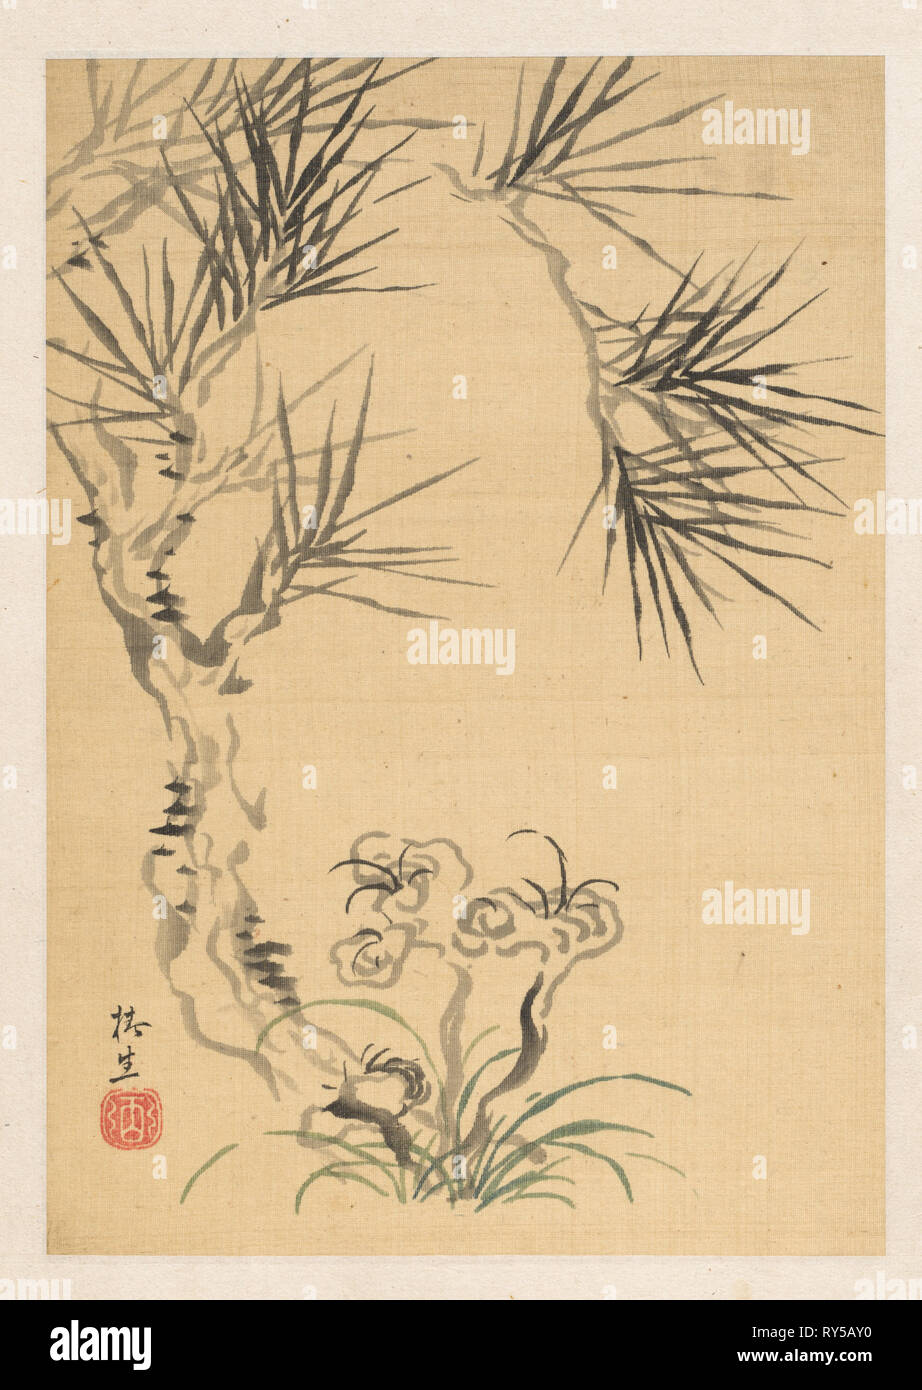 Pine Tree and Fungus, 19th century. Tsubaki Chinzan (Japanese, 1801-1854). Album leaf; ink and light color on ivory silk; sheet: 25.3 x 17.7 cm (9 15/16 x 6 15/16 in Stock Photo